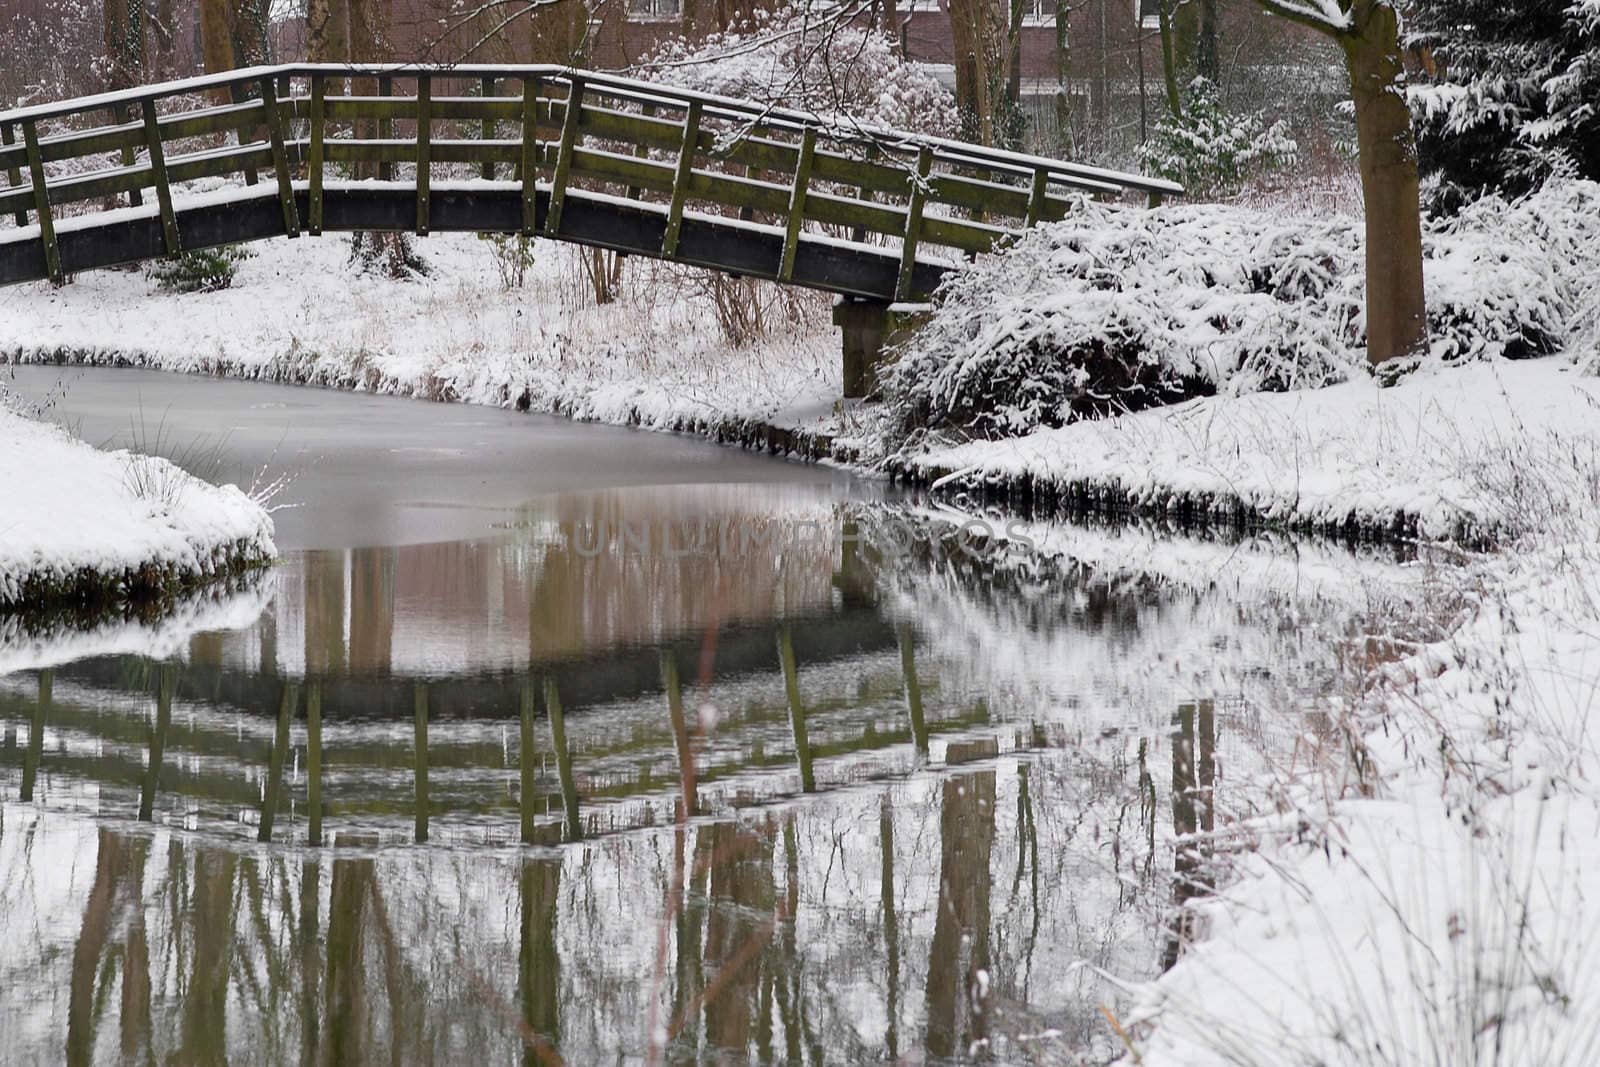 wintertime in the park, with a pond in the snow